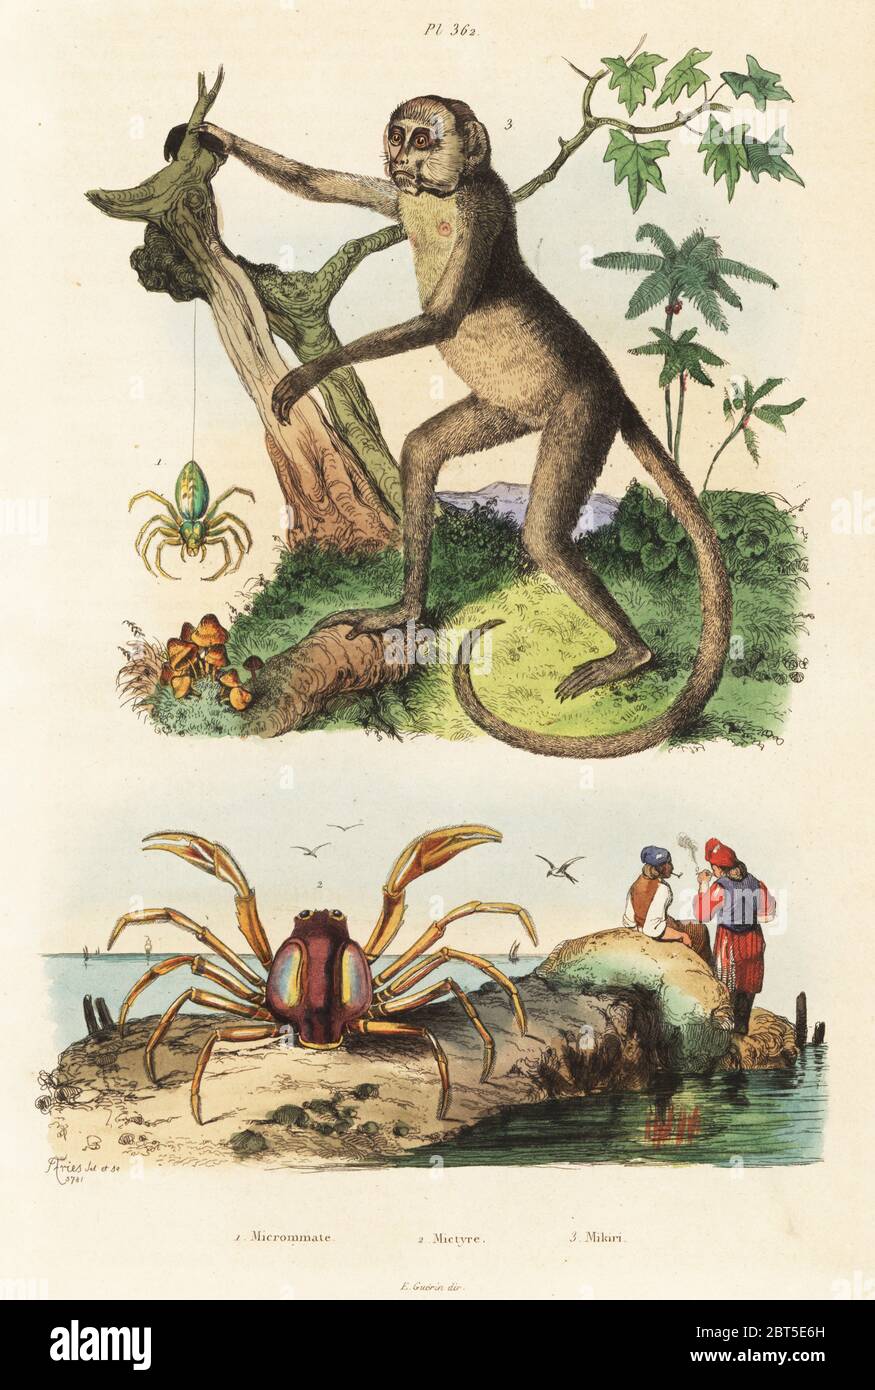 Green huntsman spider, Micromatta virescens 1, light blue soldier crab, Mictyris longicarpus 2, and critically endangered northern muriqui, Brachyteles hypoxanthus 3. Micrommate, Mictyre, Mikiri. Handcoloured steel engraving after an illustration by Adolph Fries from Felix-Edouard Guerin-Meneville's Dictionnaire Pittoresque d'Histoire Naturelle (Picturesque Dictionary of Natural History), Paris, 1834-39. Stock Photo